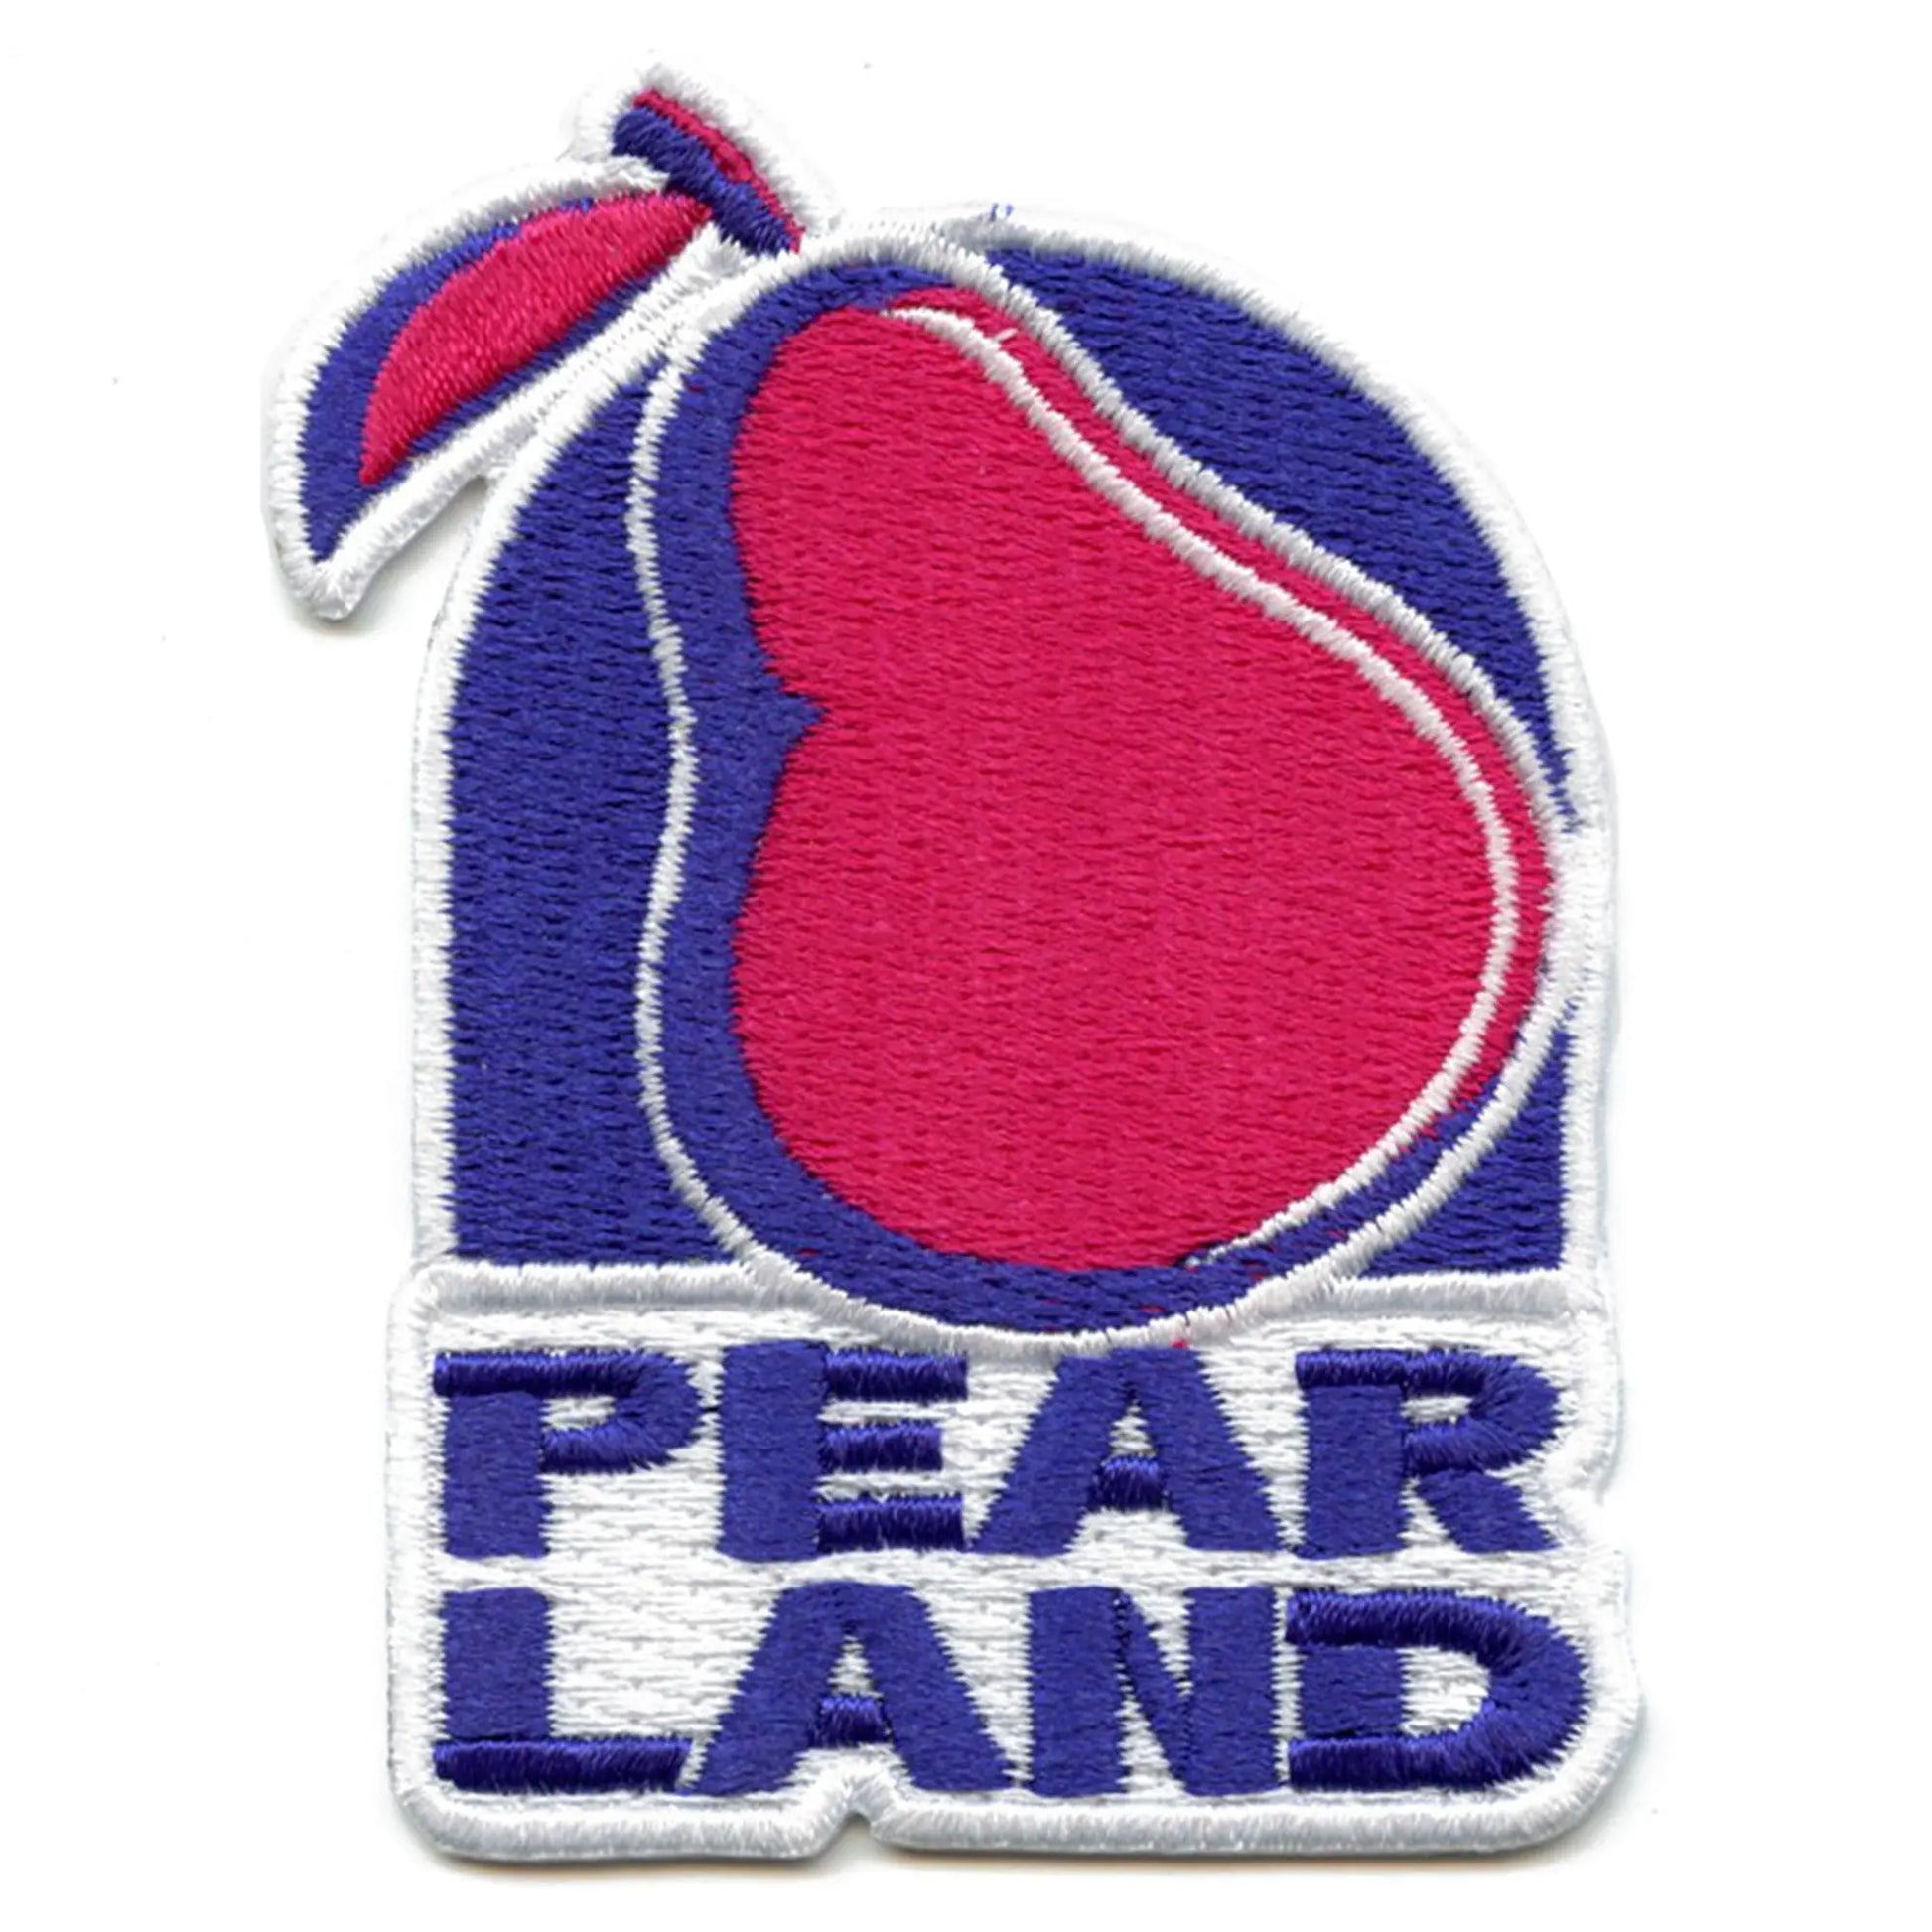 Pearland Mexican Fast Food Patch Restaurant Chain Parody Embroidered Iron On